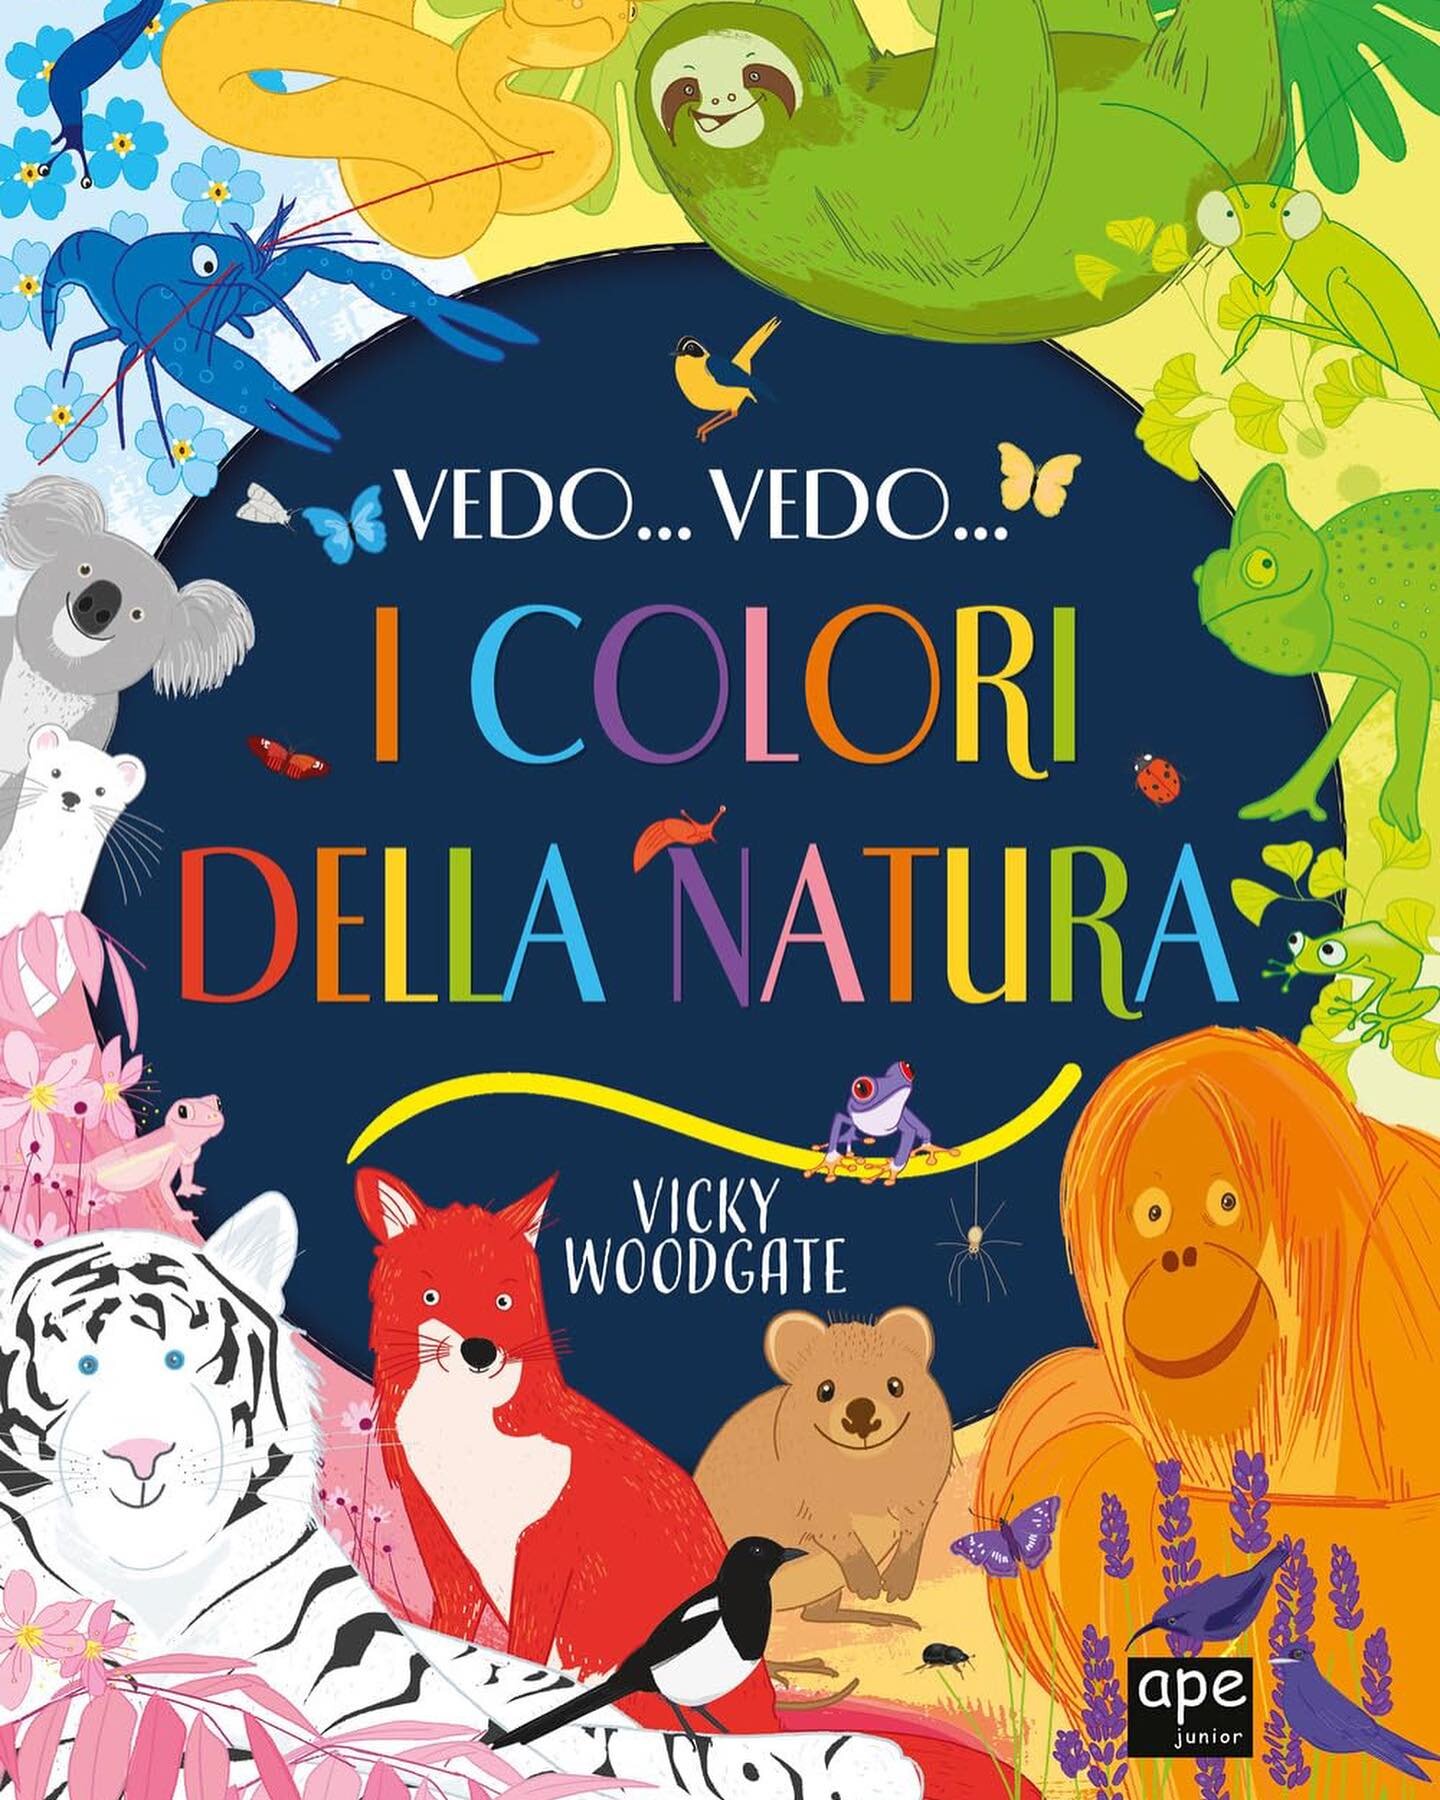 Delighted that I Can See Nature&rsquo;s Rainbow is out in ITALY  Published by APE JUNIOR @salani_editore  Isn&rsquo;t the Italian language beautiful 🇫🇷❤️. #vickywoodgate #apejunior #kidlit #nonfictionbooksforkids #nonfictionbooks #colours #nature #